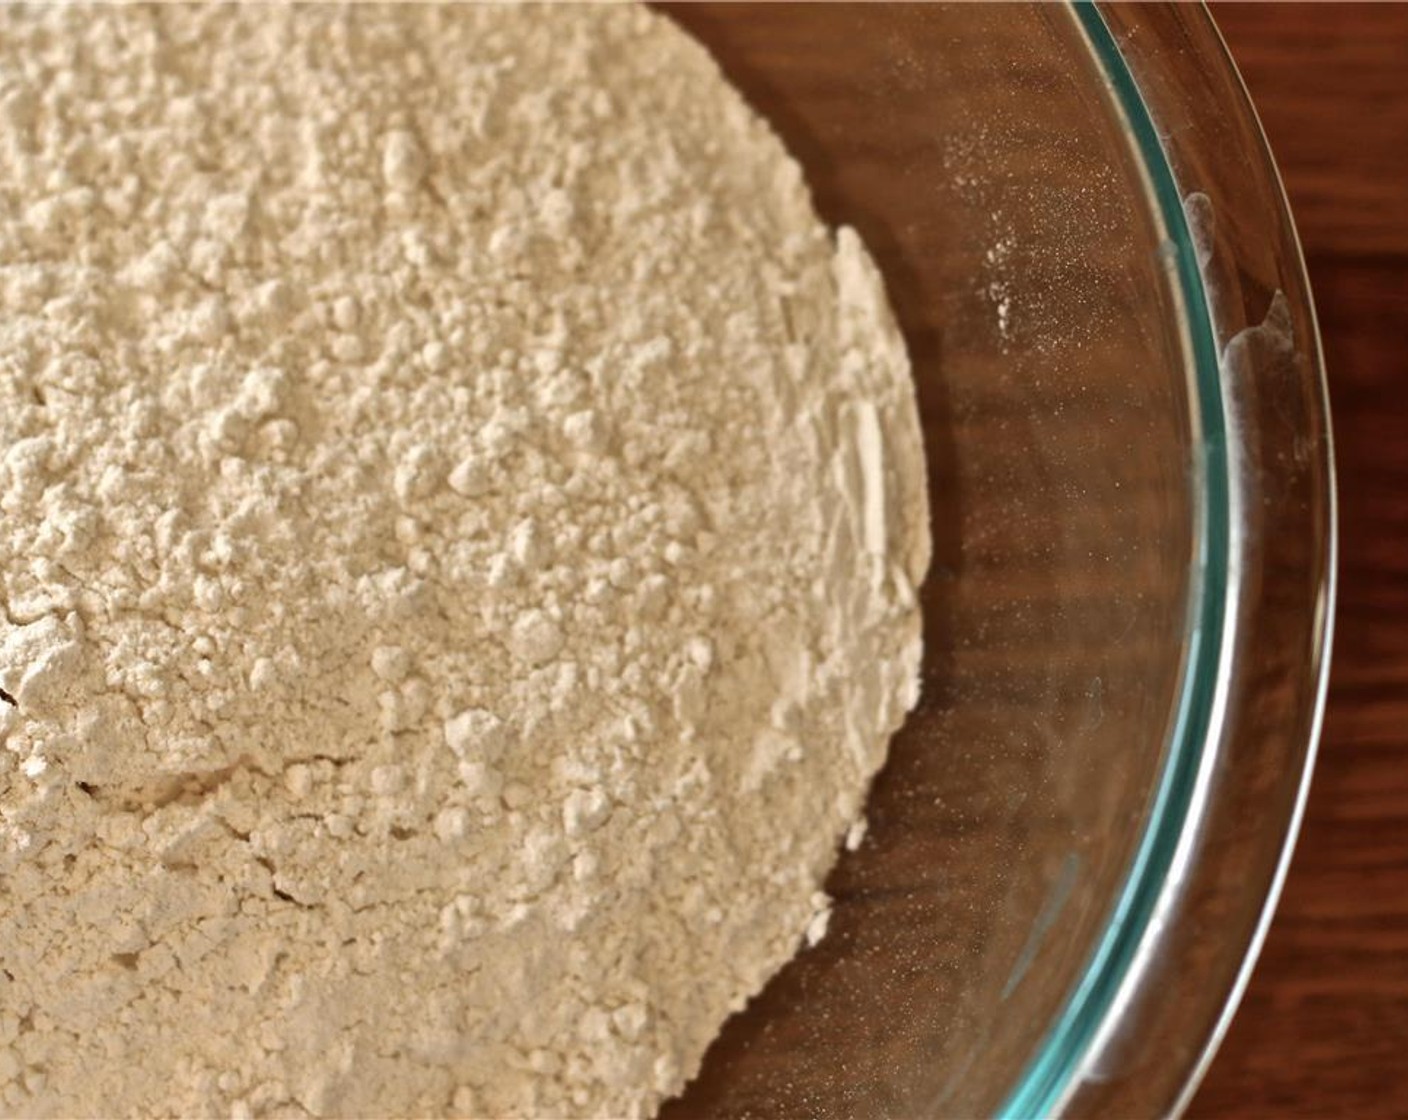 step 2 In a large bowl, thoroughly whisk together the All-Purpose Flour (3 cups) and Baking Powder (1/2 Tbsp).